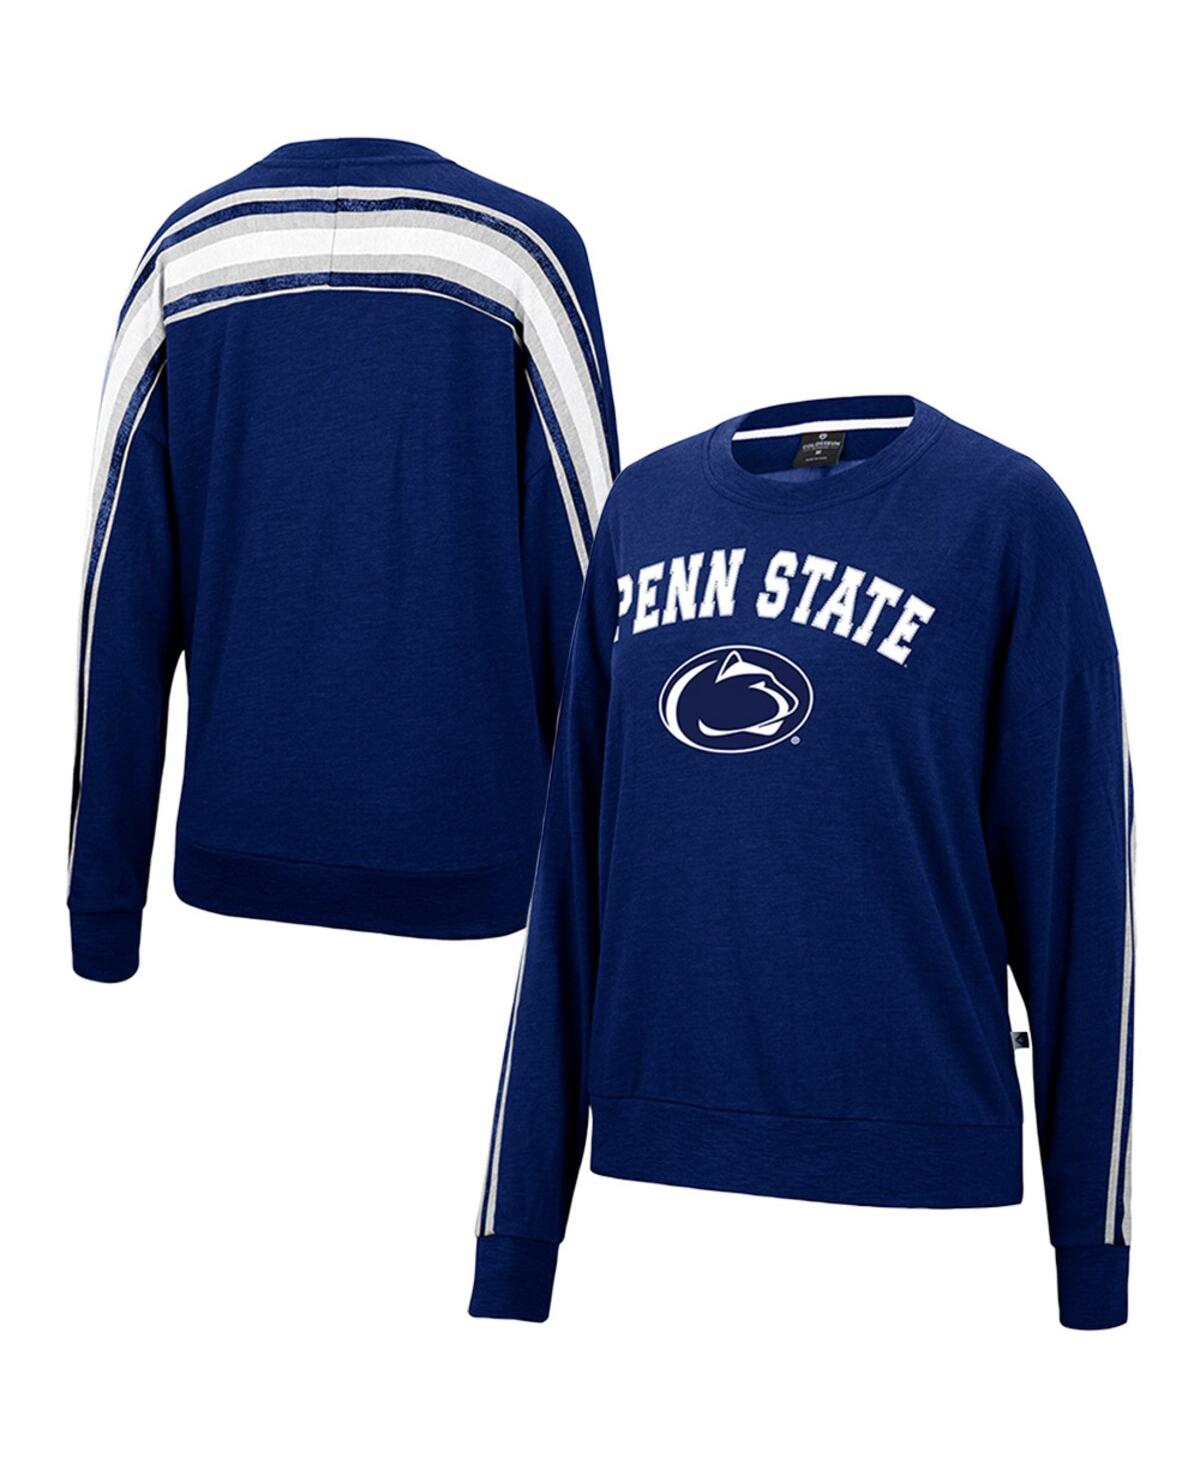 Women's Colosseum Heathered Navy Penn State Nittany Lions Team Oversized Pullover Sweatshirt - Navy